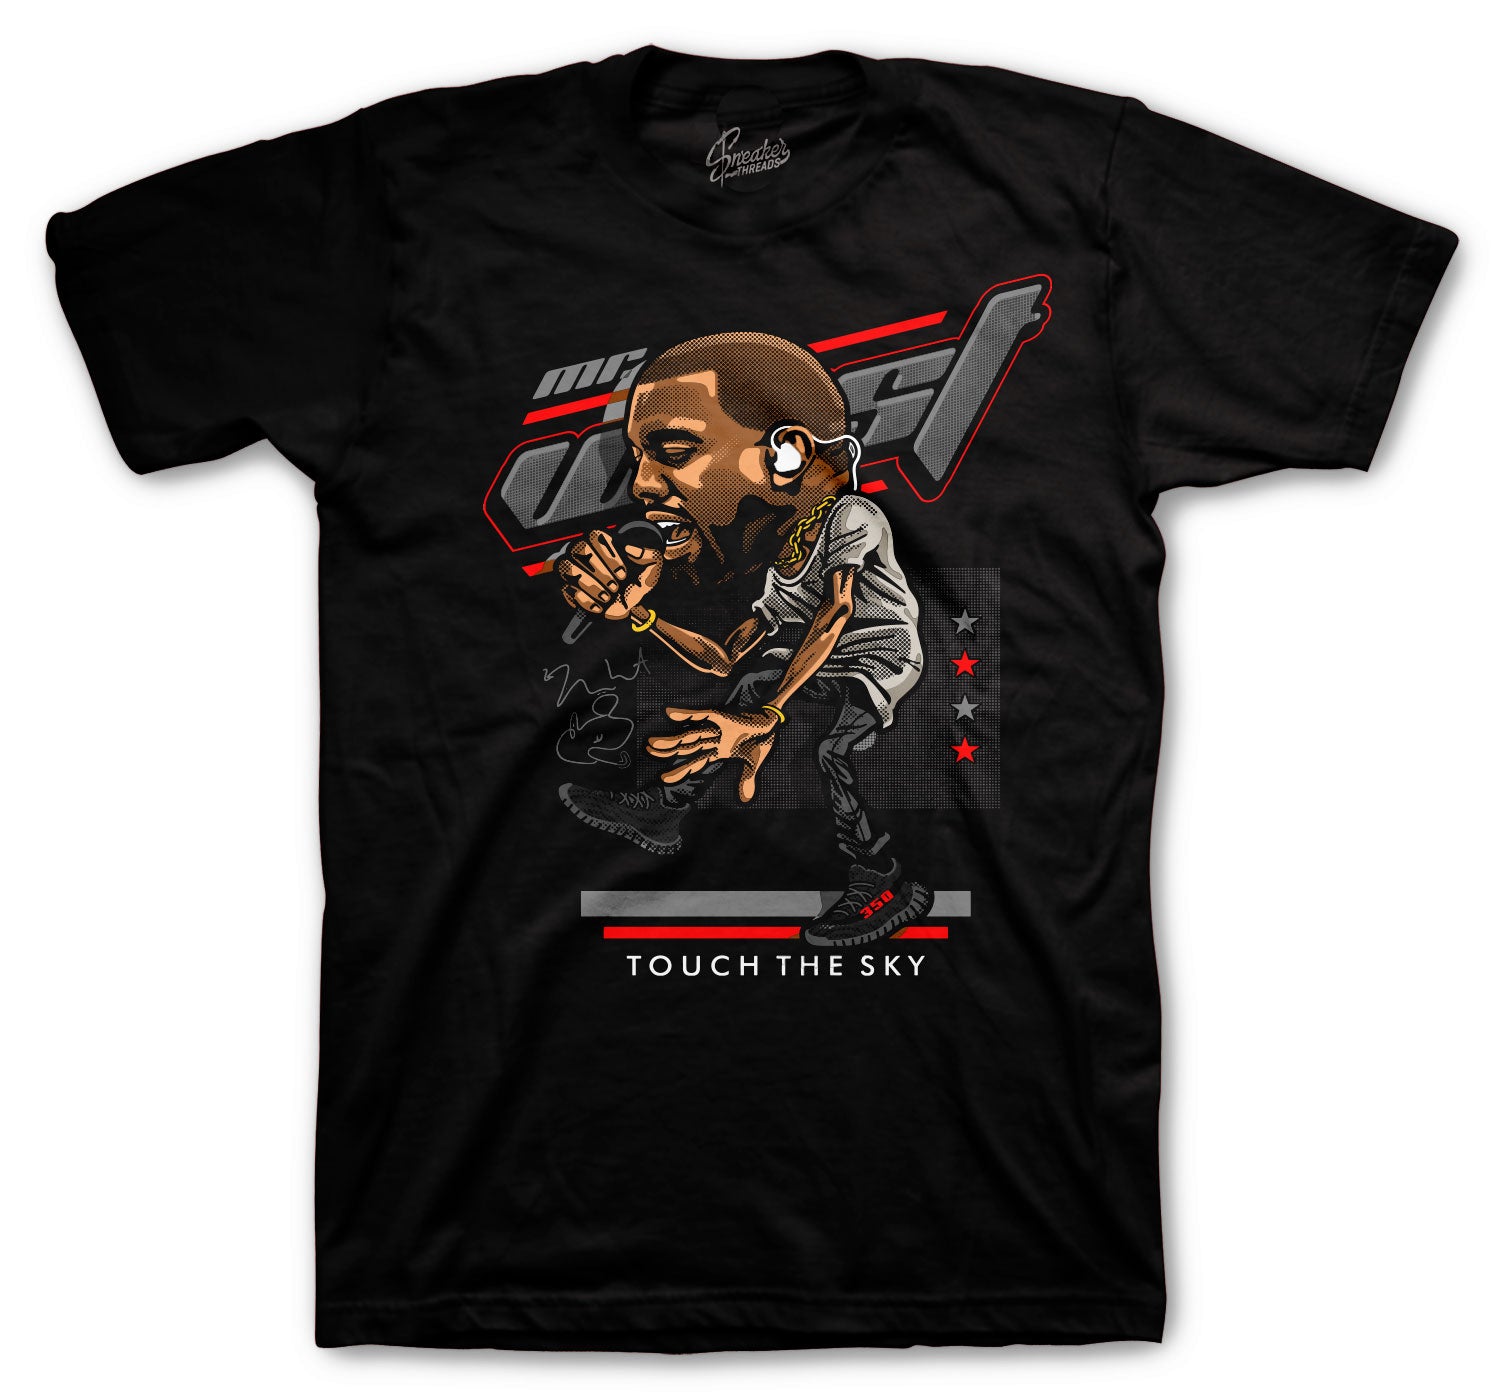 Bred 350 Shirt - Touch The Sky - Black